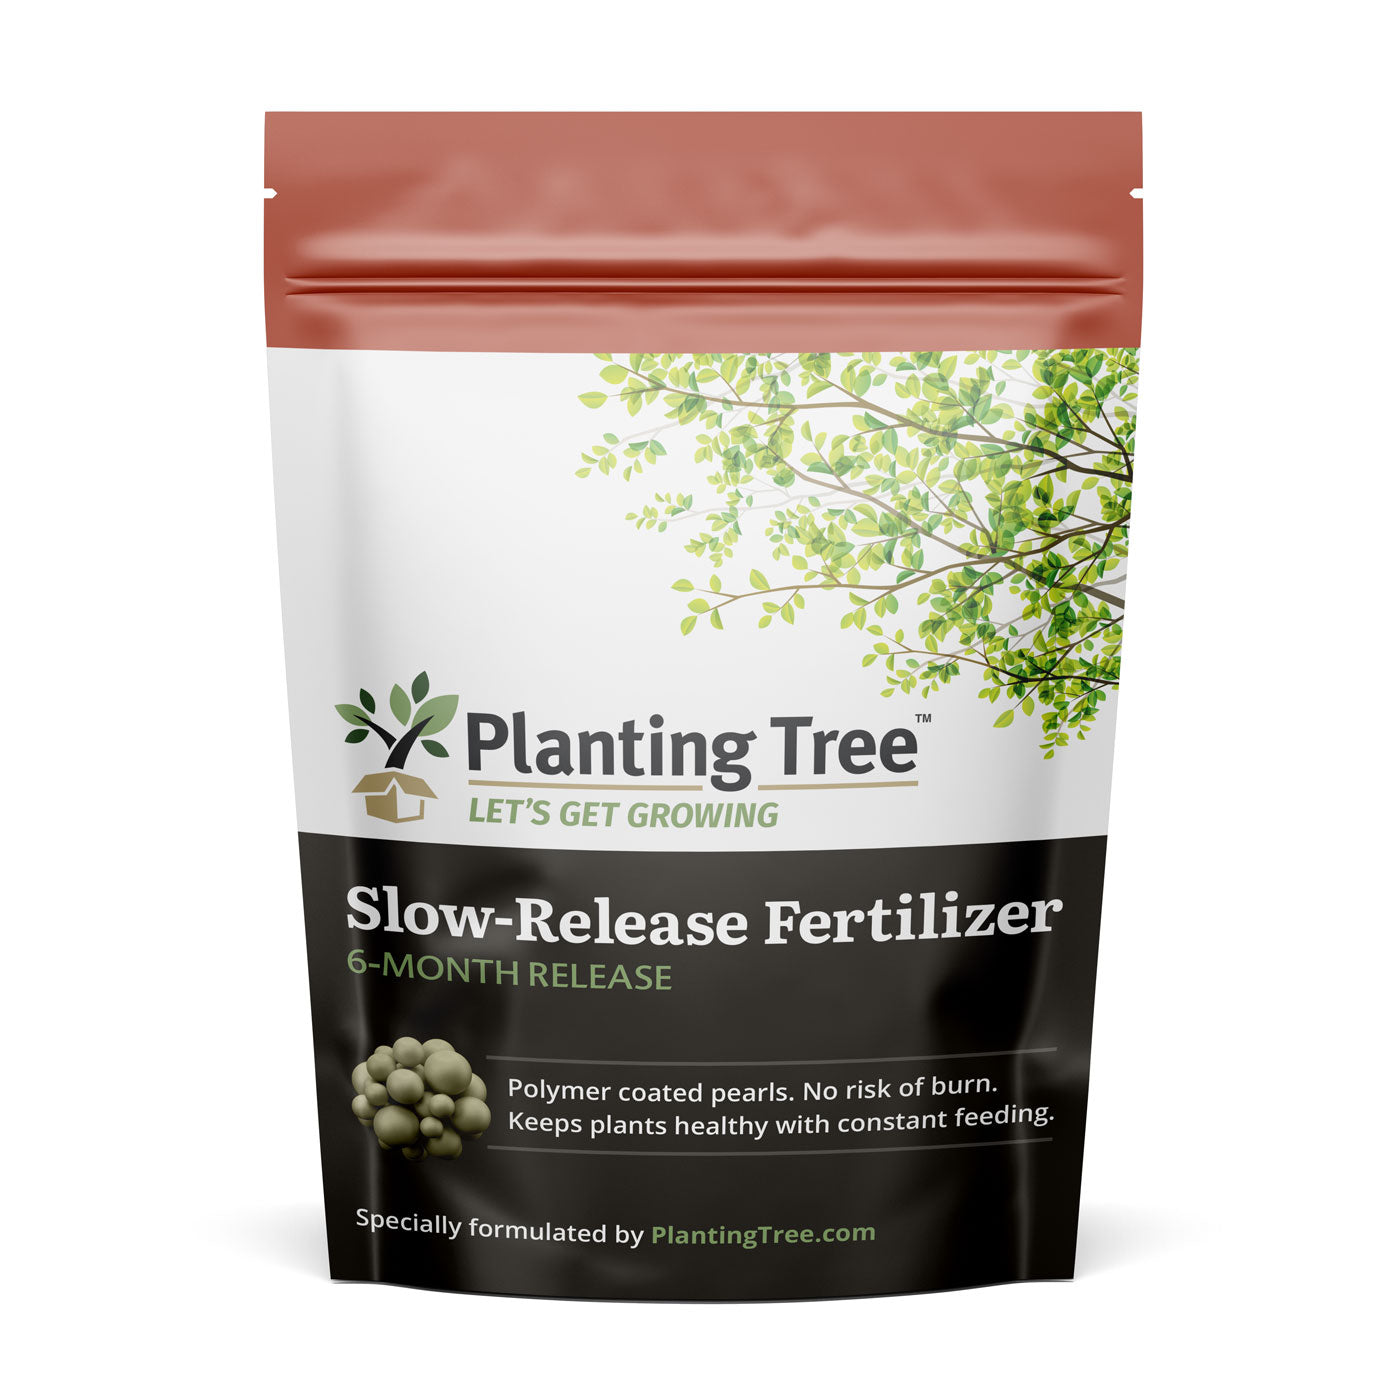 Slow Release Fertilizer for sale at Maples N More Nursery